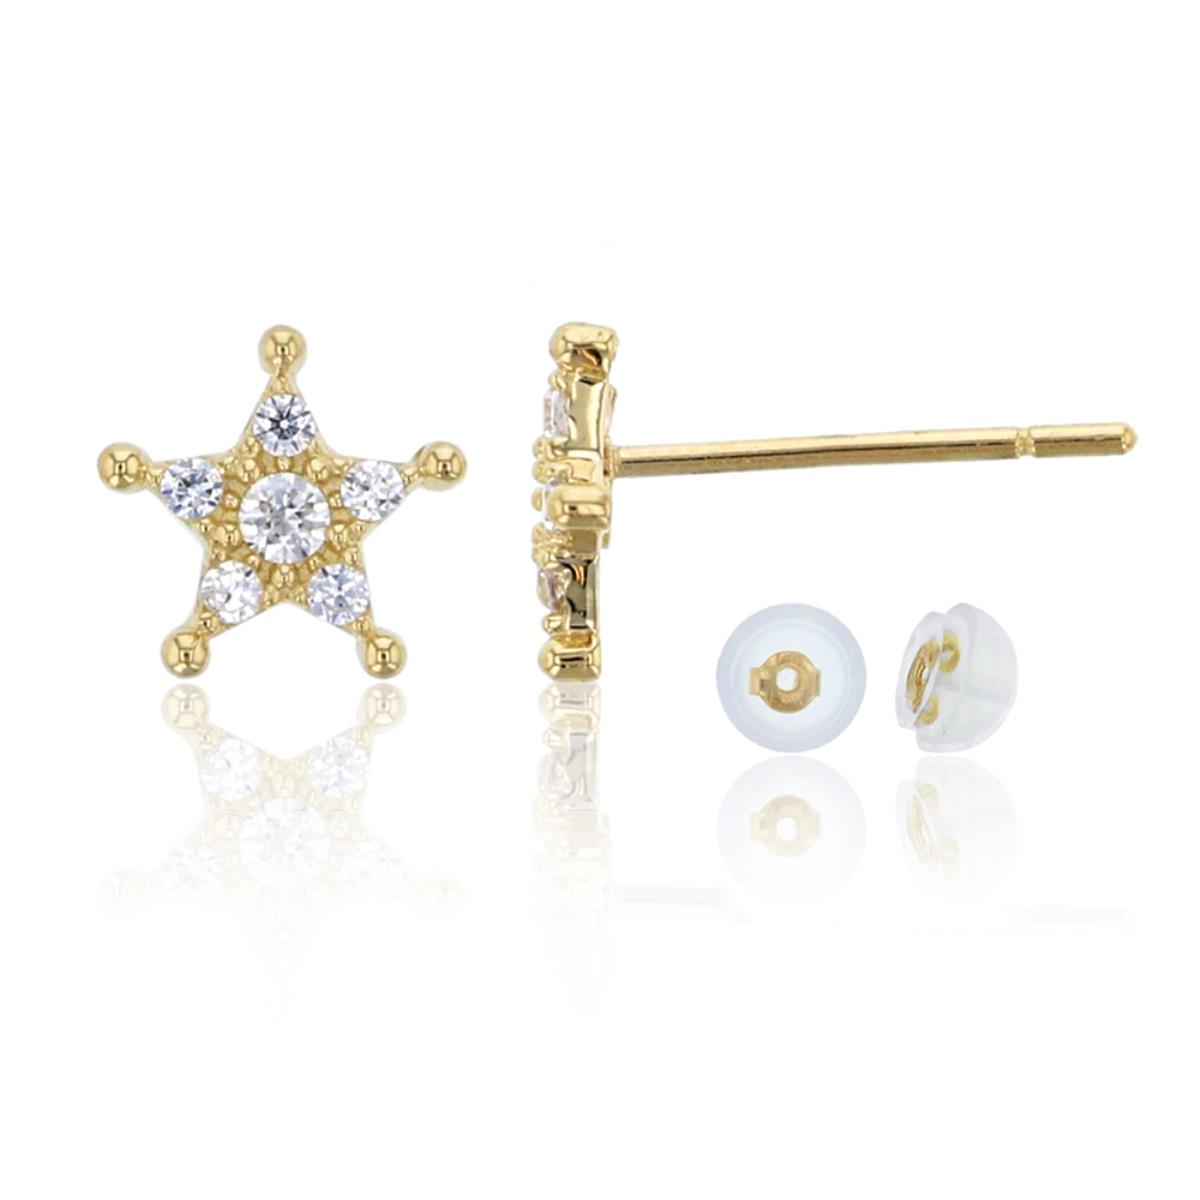 10K Yellow Gold 6x6mm Micropave Star CZ Stud Earring & 10K Silicone Back